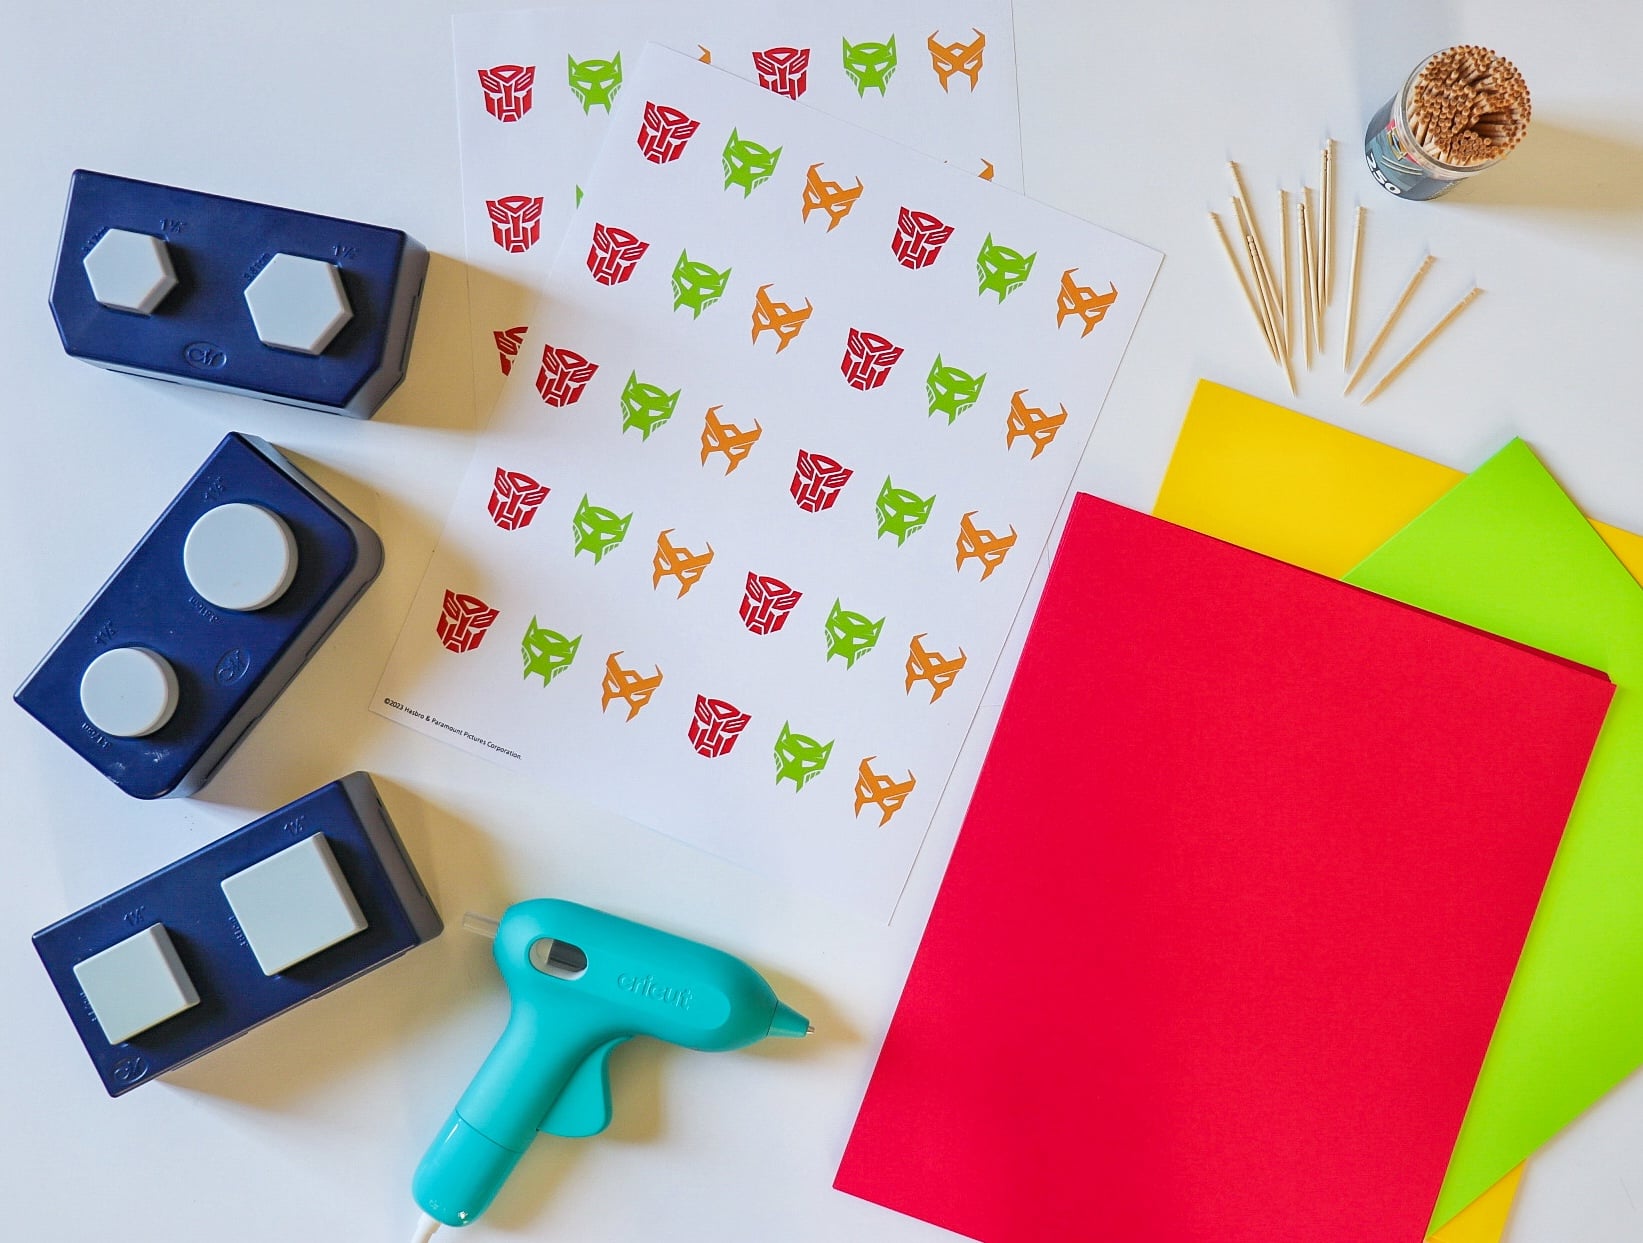 DIY TRANSFORMERS Cupcake Toppers from Transformer cupcake toppers printable